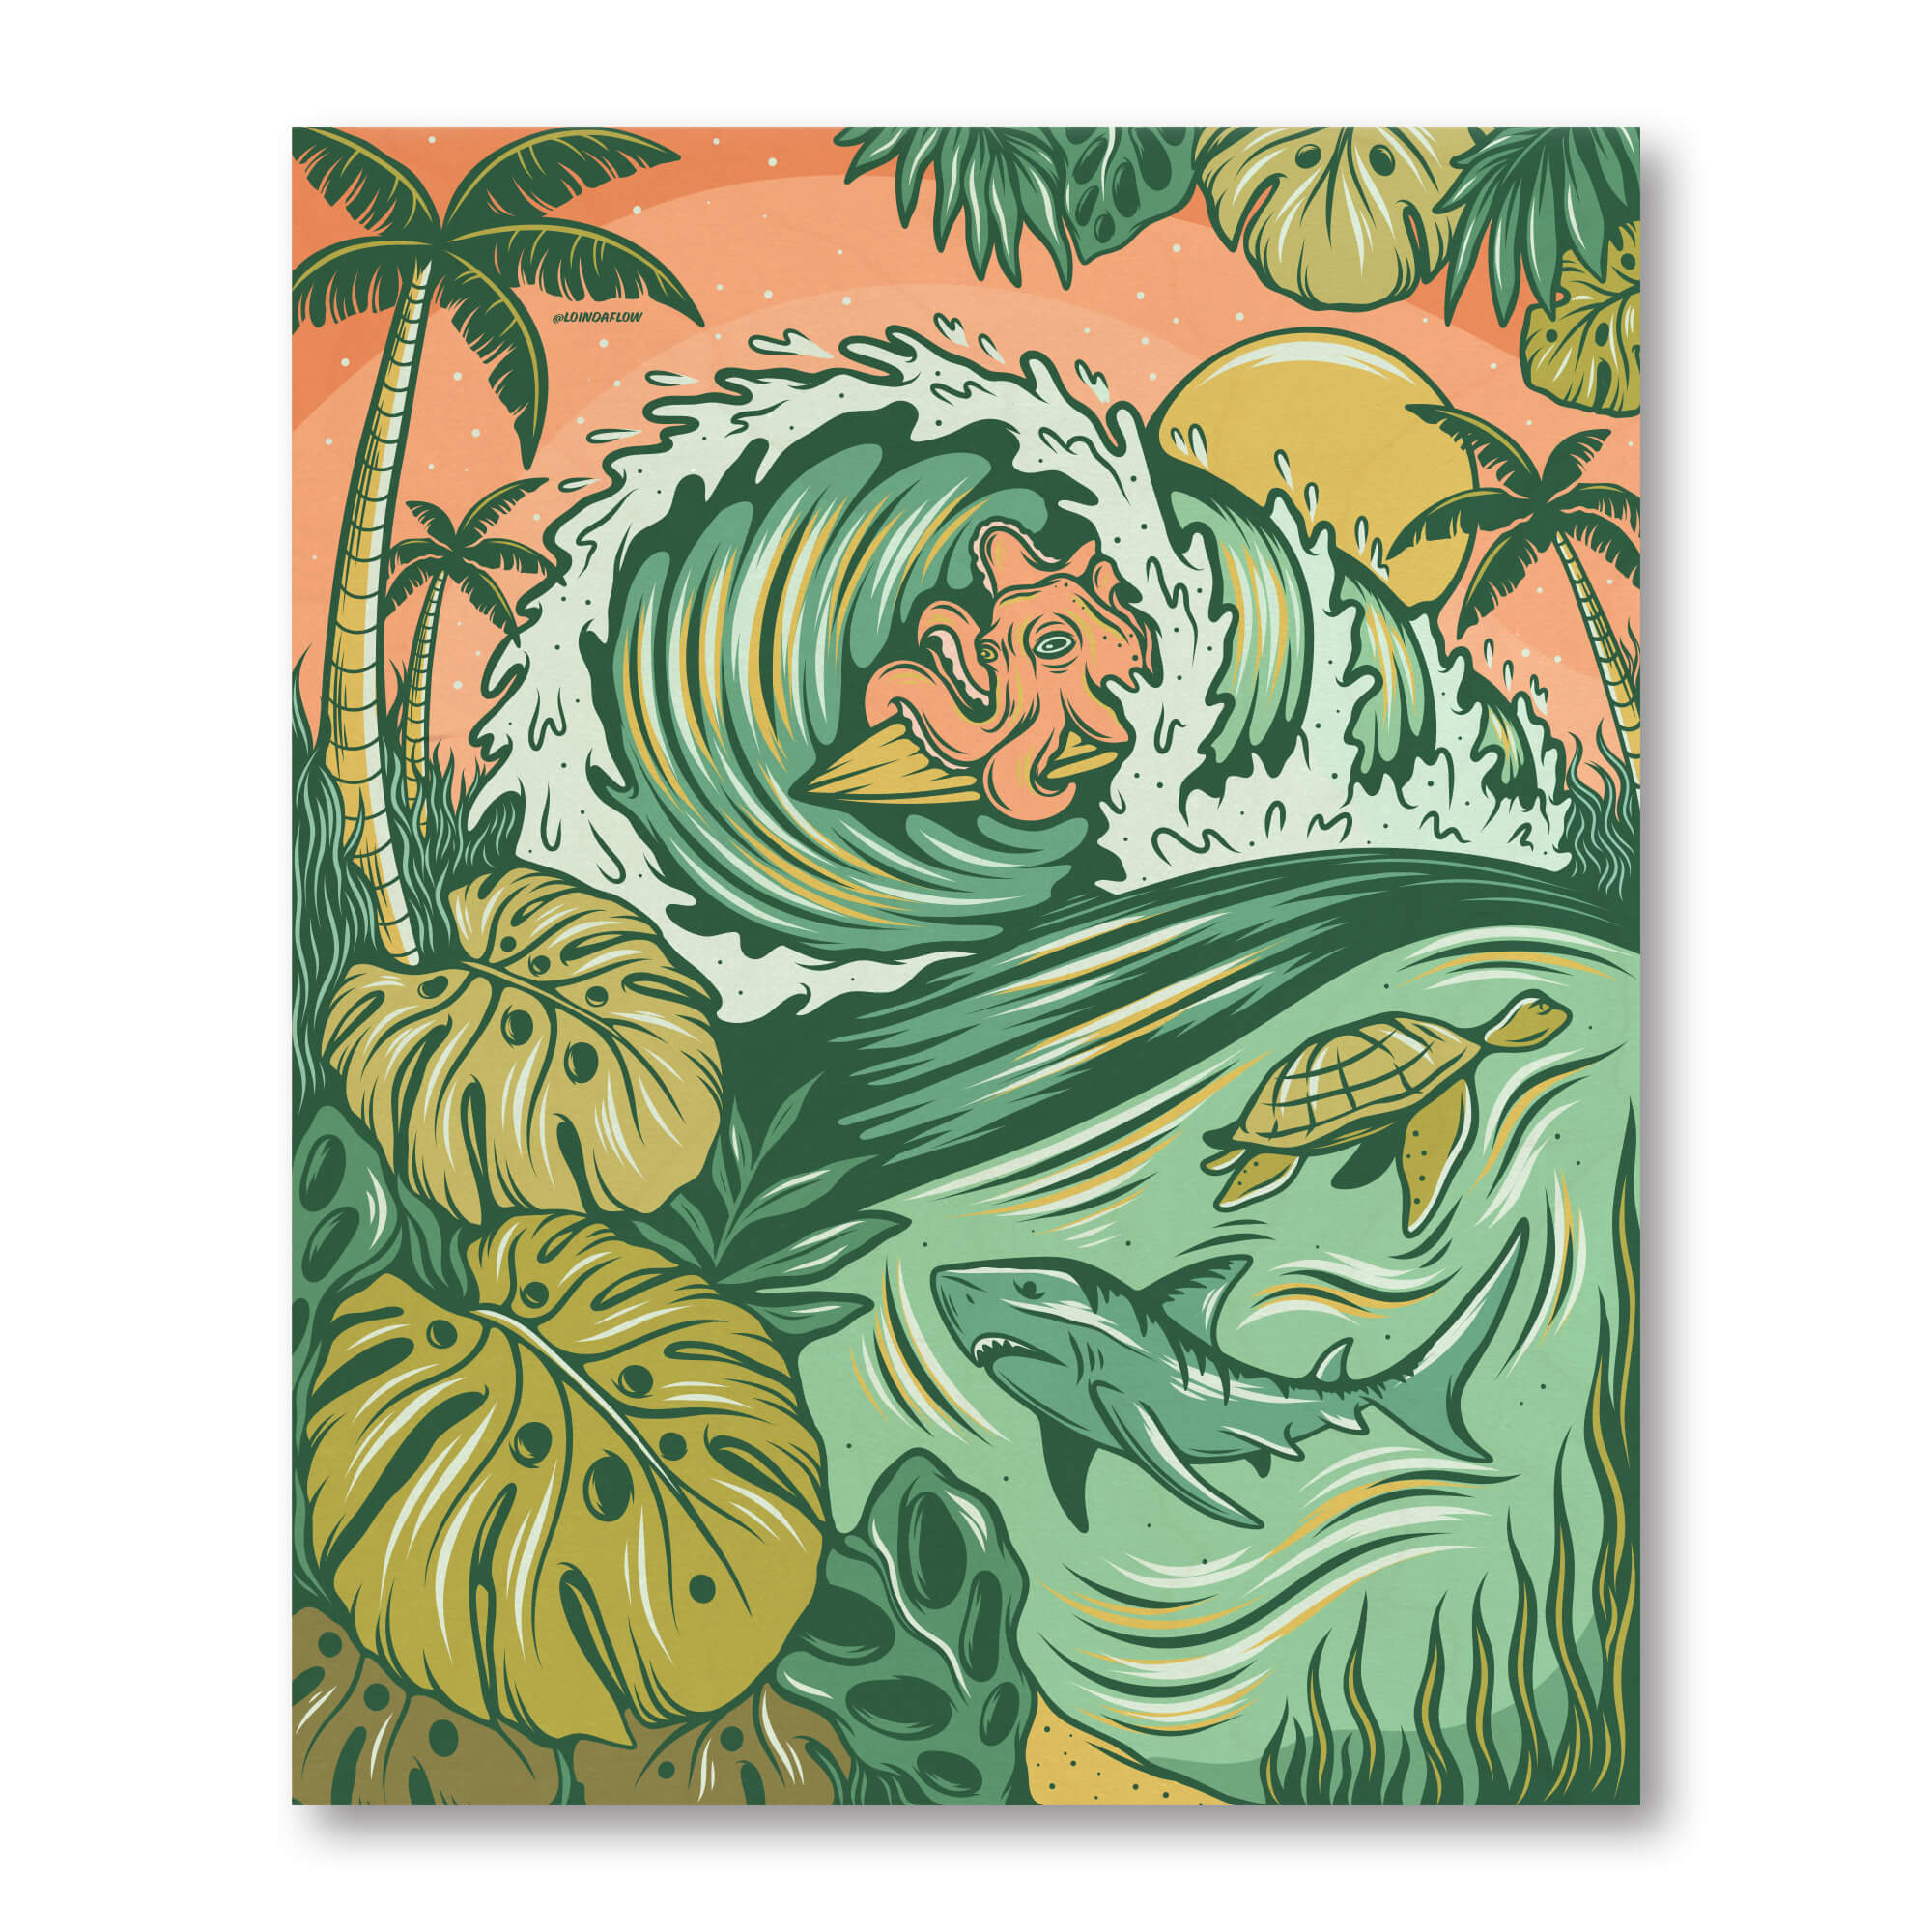 Wood art print of a sunset with some sea animals and large crashing waves by Hawaii artist Laihha Organna